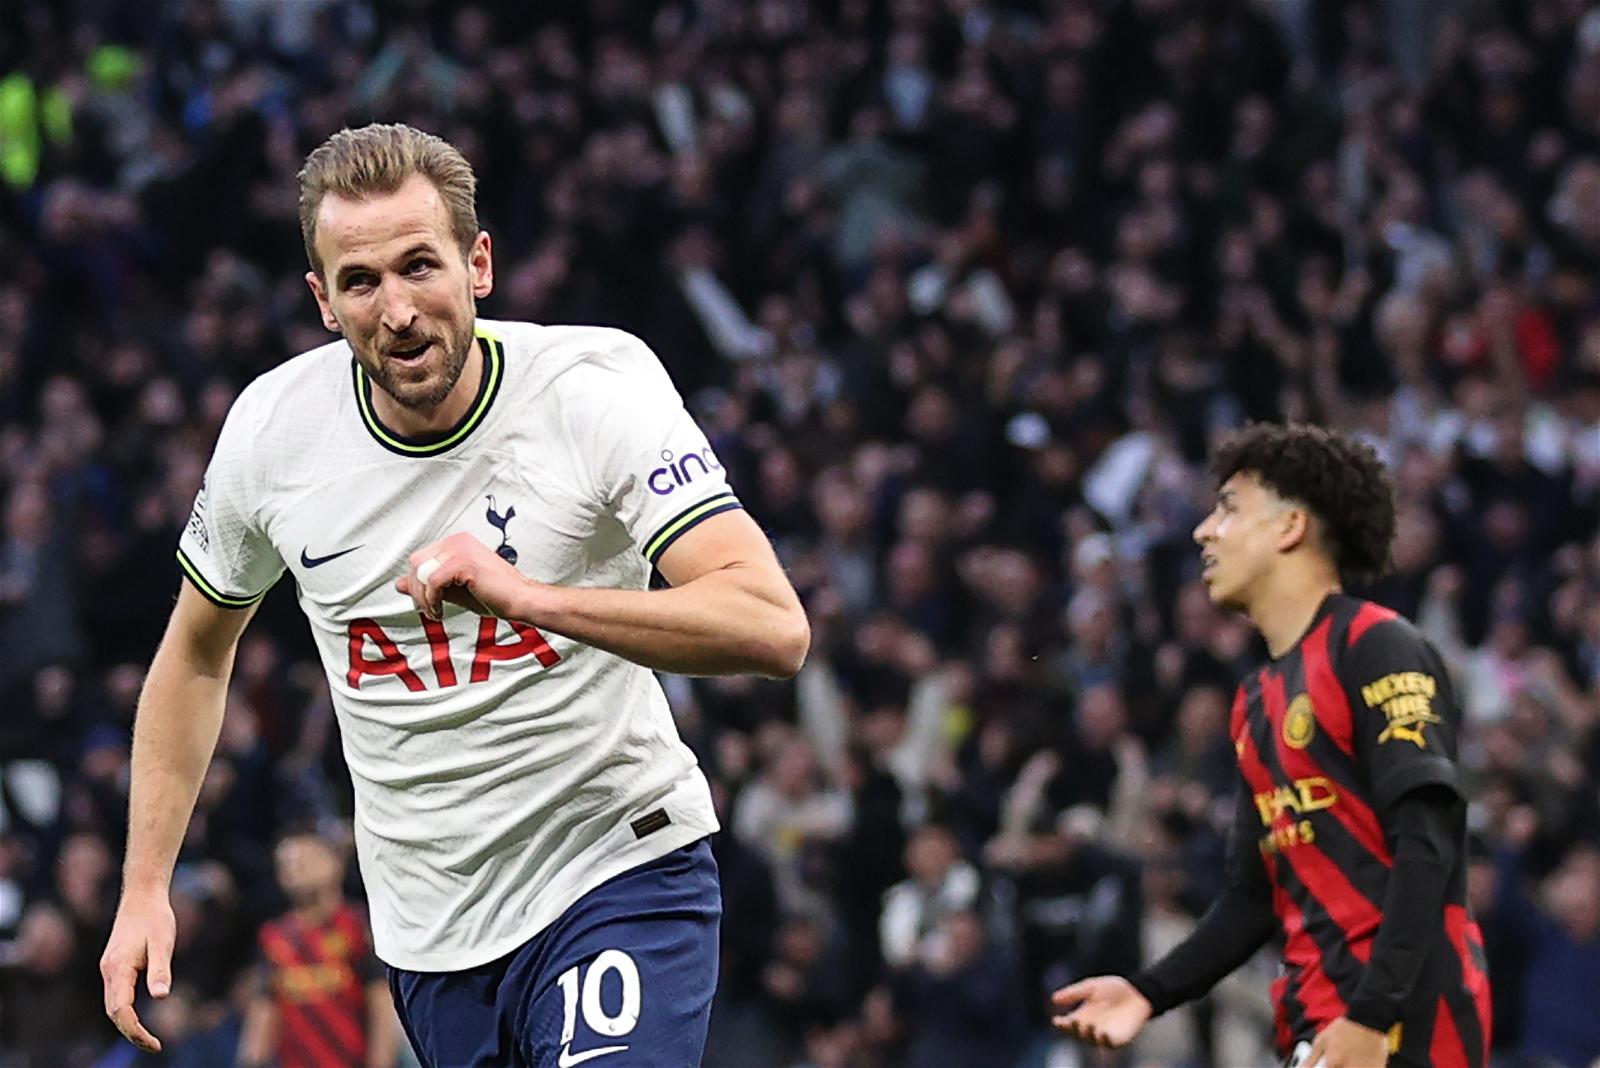 <strong></img>Harry Kane becomes Tottenham’s all-time top scorer with 267 goals</strong>